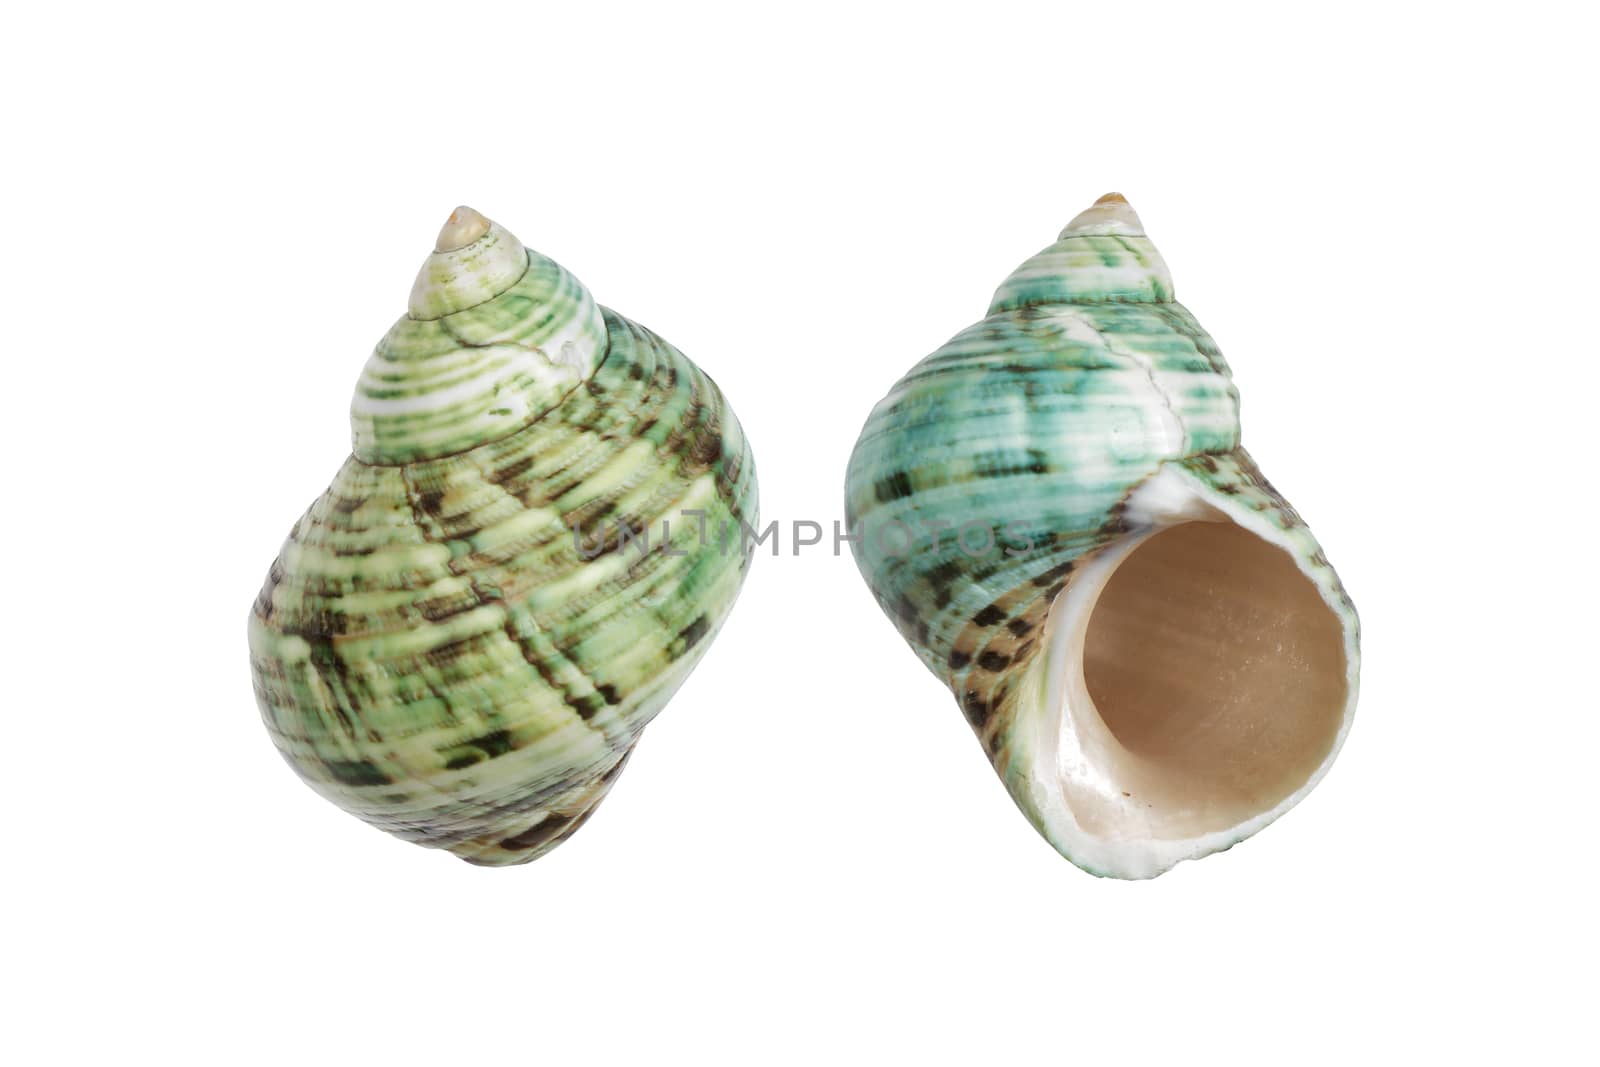 Two Periwinkle shells blue green on white with clipping path